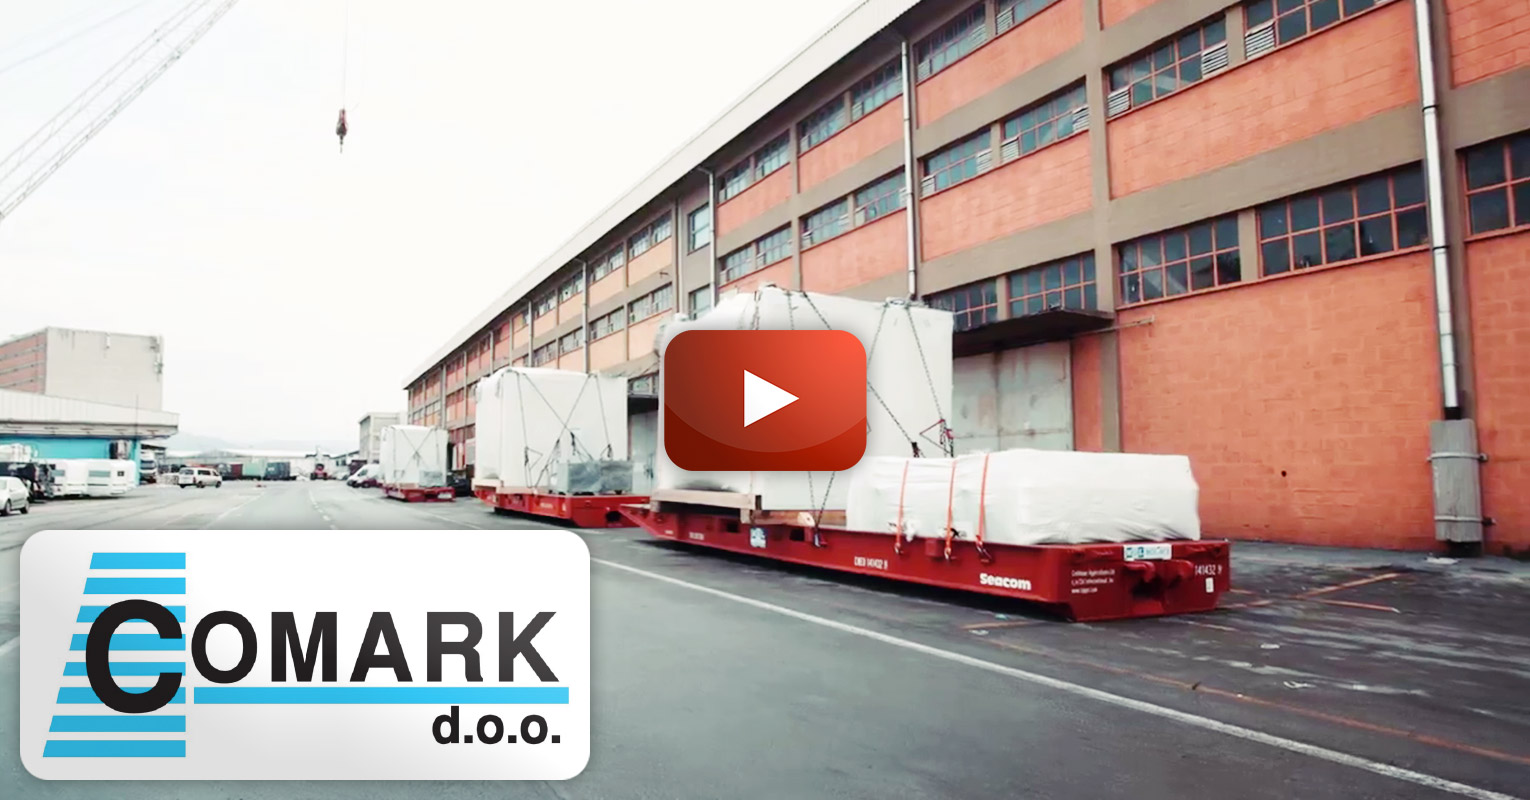 Comark Moved 15 pieces of Heavy Press Machines Weighing 30 to 70 tons from Europe to the Far East via Port of Koper by RORO